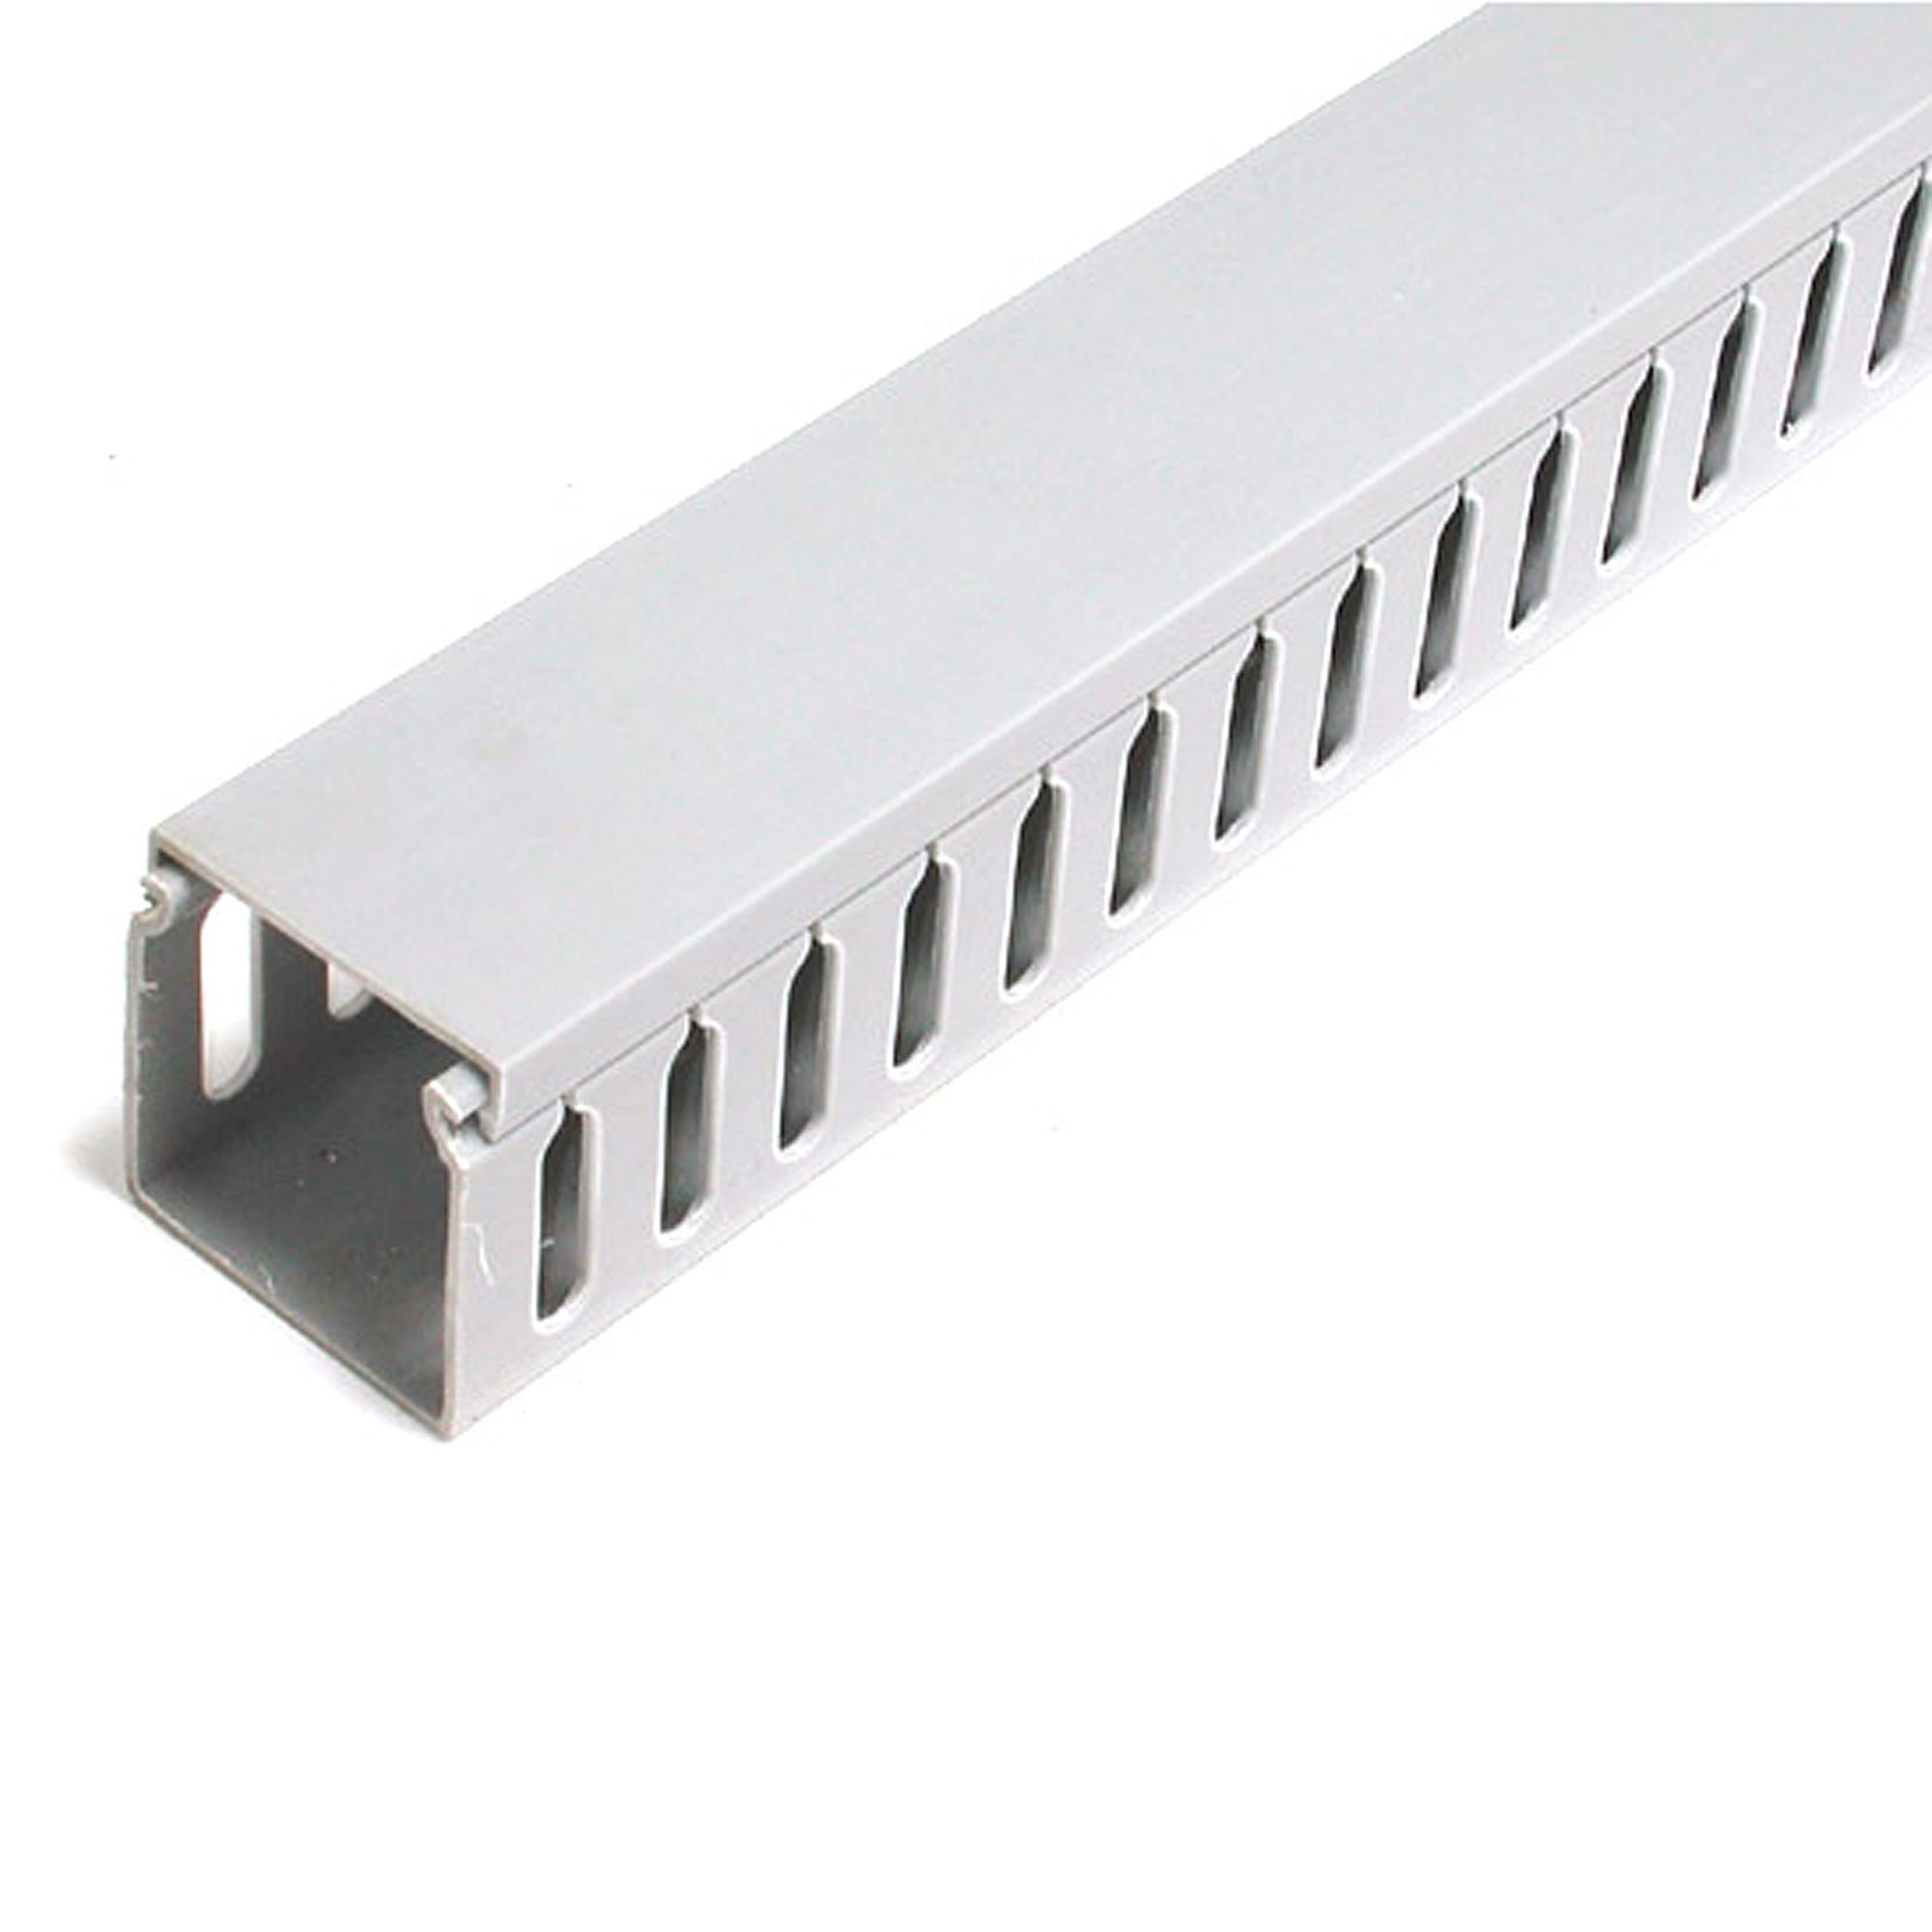 New 1"x2"x2m Narrow Finger Open Slot Wiring Duct/Cable Raceway with Cover White 